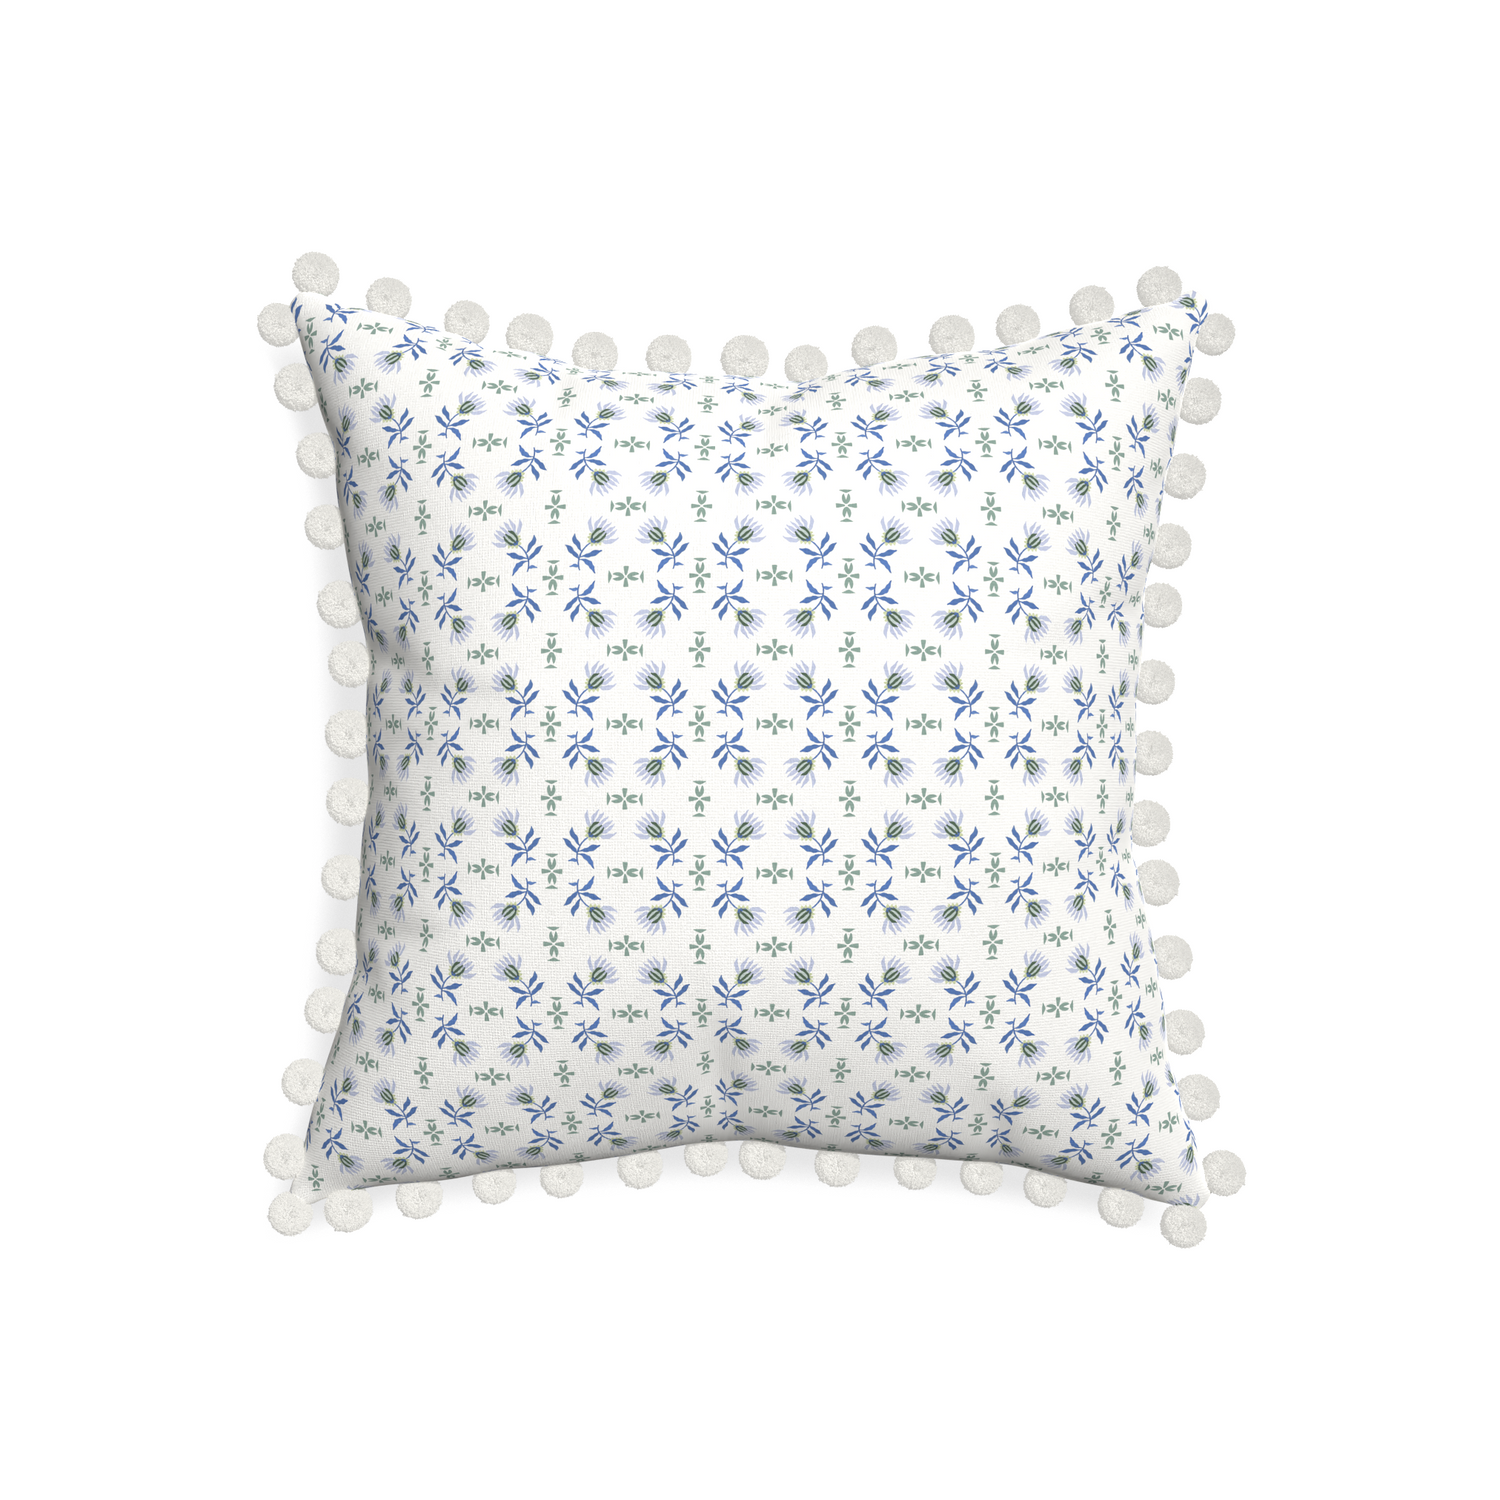 20-square lee custom blue & green floralpillow with snow pom pom on white background